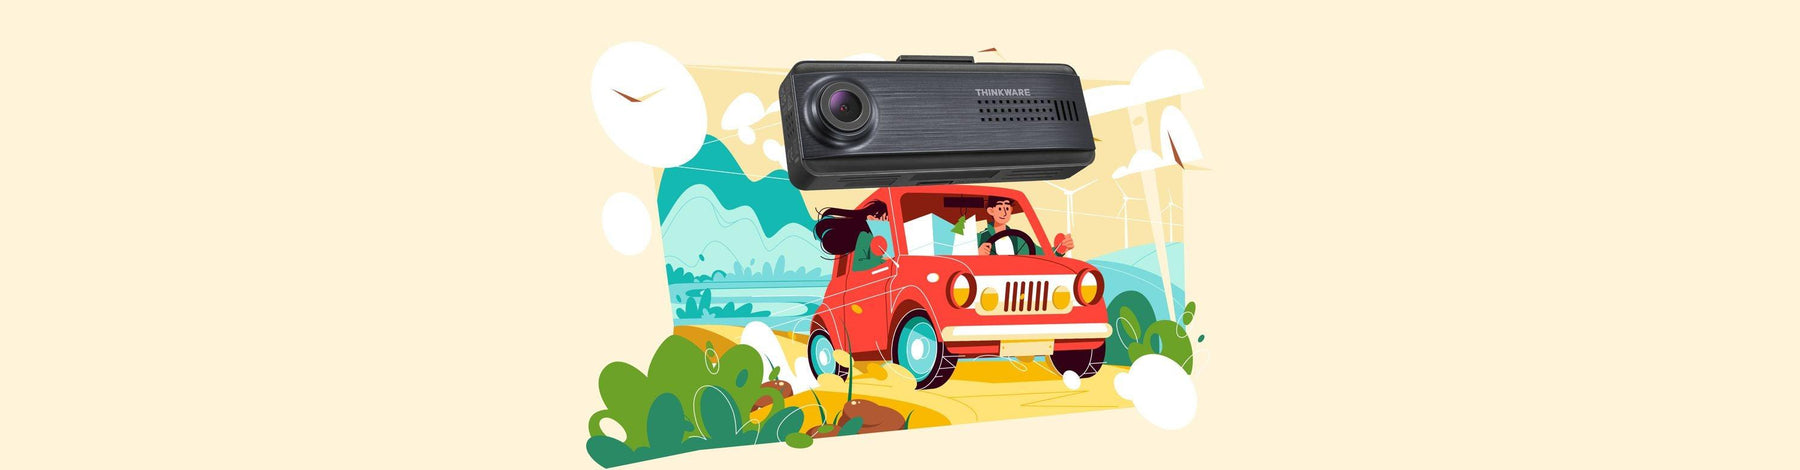 We've partnered with Thinkware to give away the new Thinkware Q200 dash cam - - BlackboxMyCar Canada